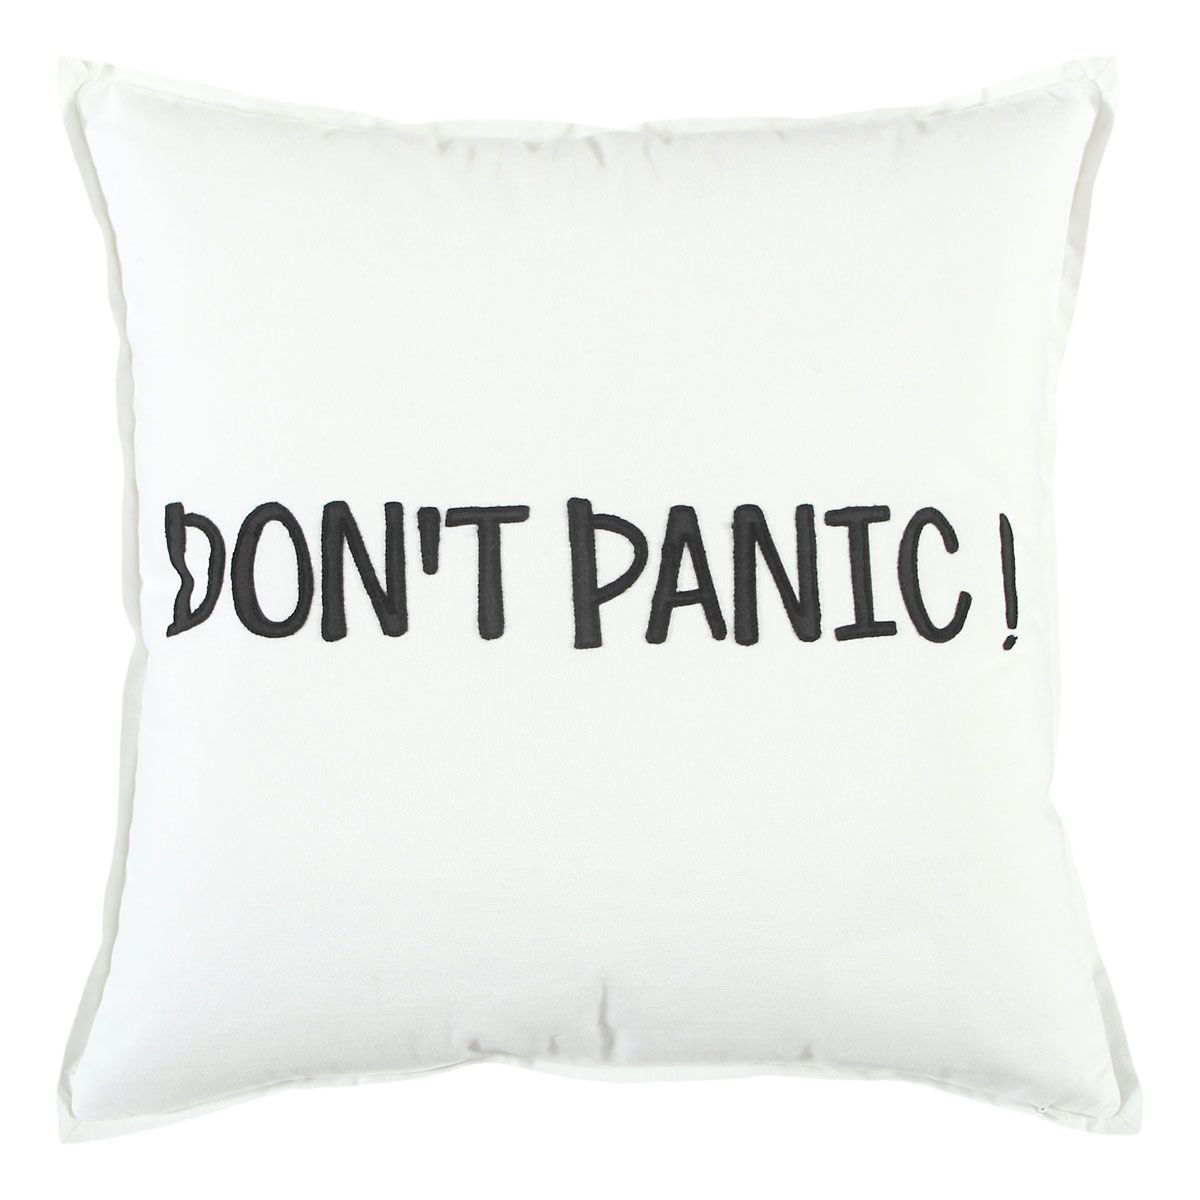 Picture of PANIC THROW PILLOW